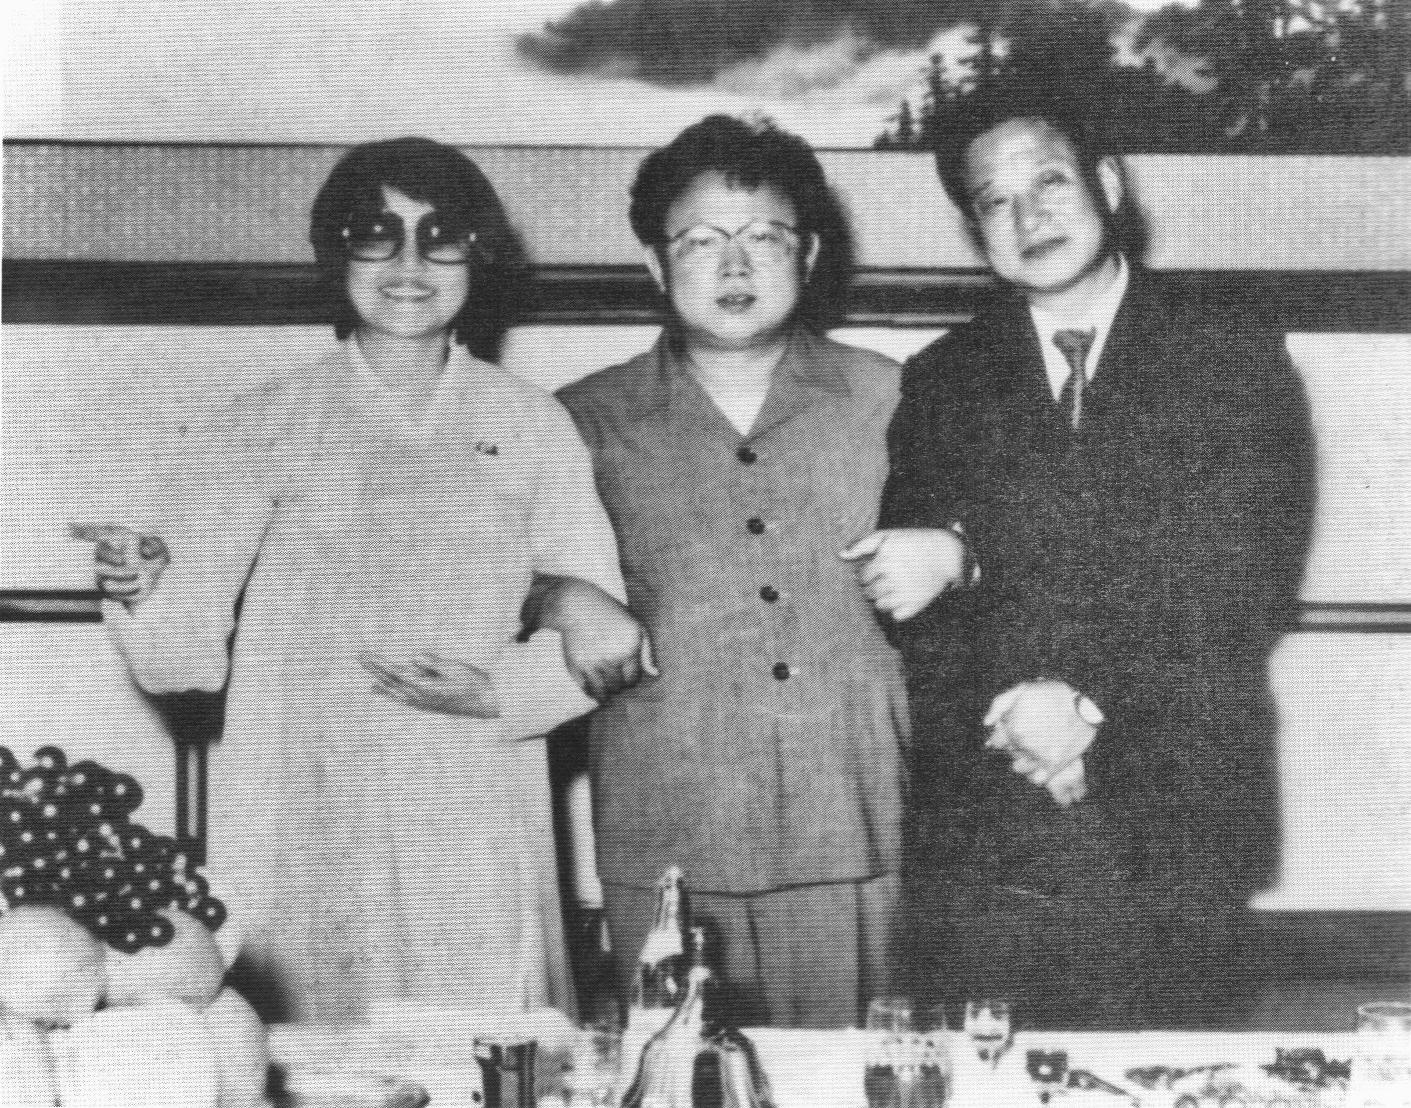 Choi Eun-hee and Shin Sang-ok with Kim Jong-il at a party thrown by the North Korean leader to reunite the couple in March 1983.